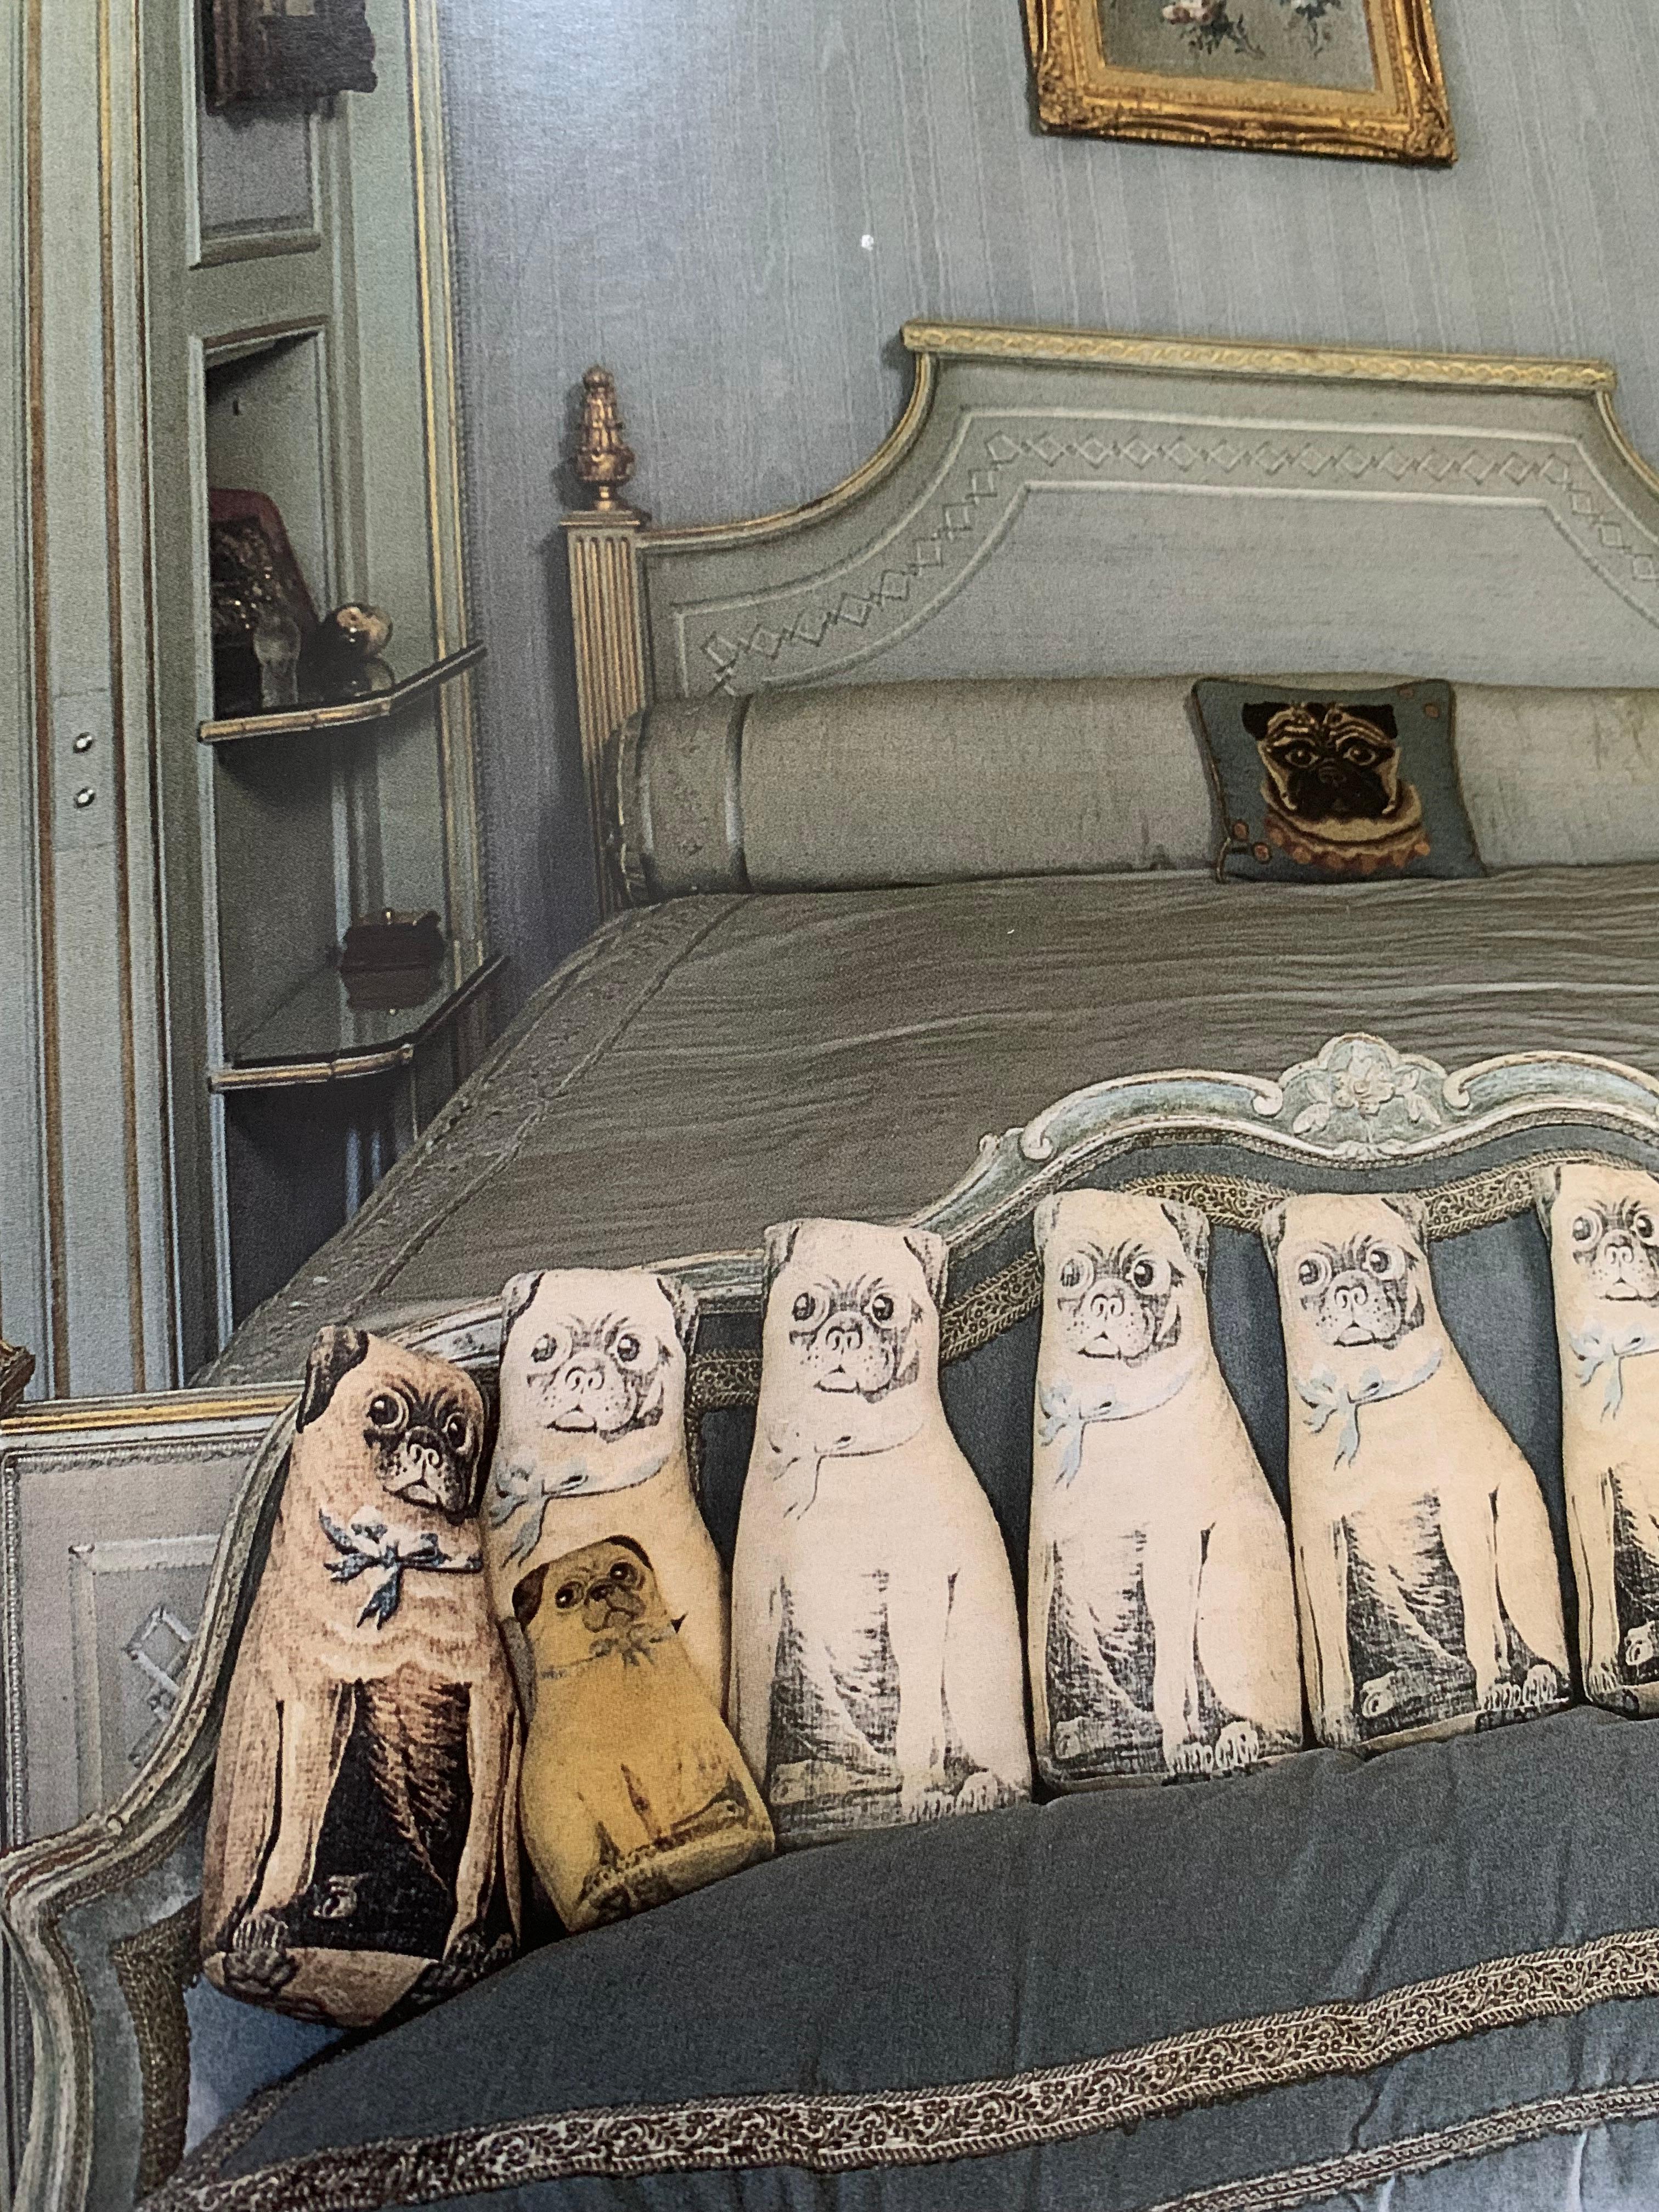 Rare Charming Pair of Early 20th Century Printed Cotton Pug Pillows For Sale 5